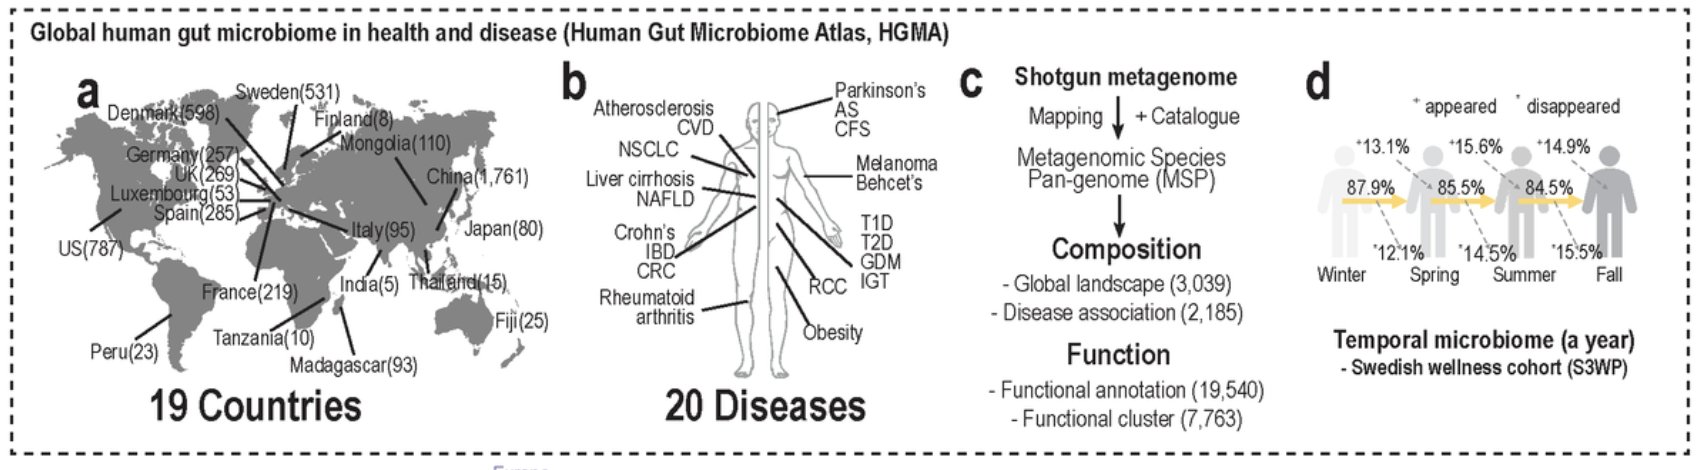 Global and temporal state of the human gut microbiome in health and disease